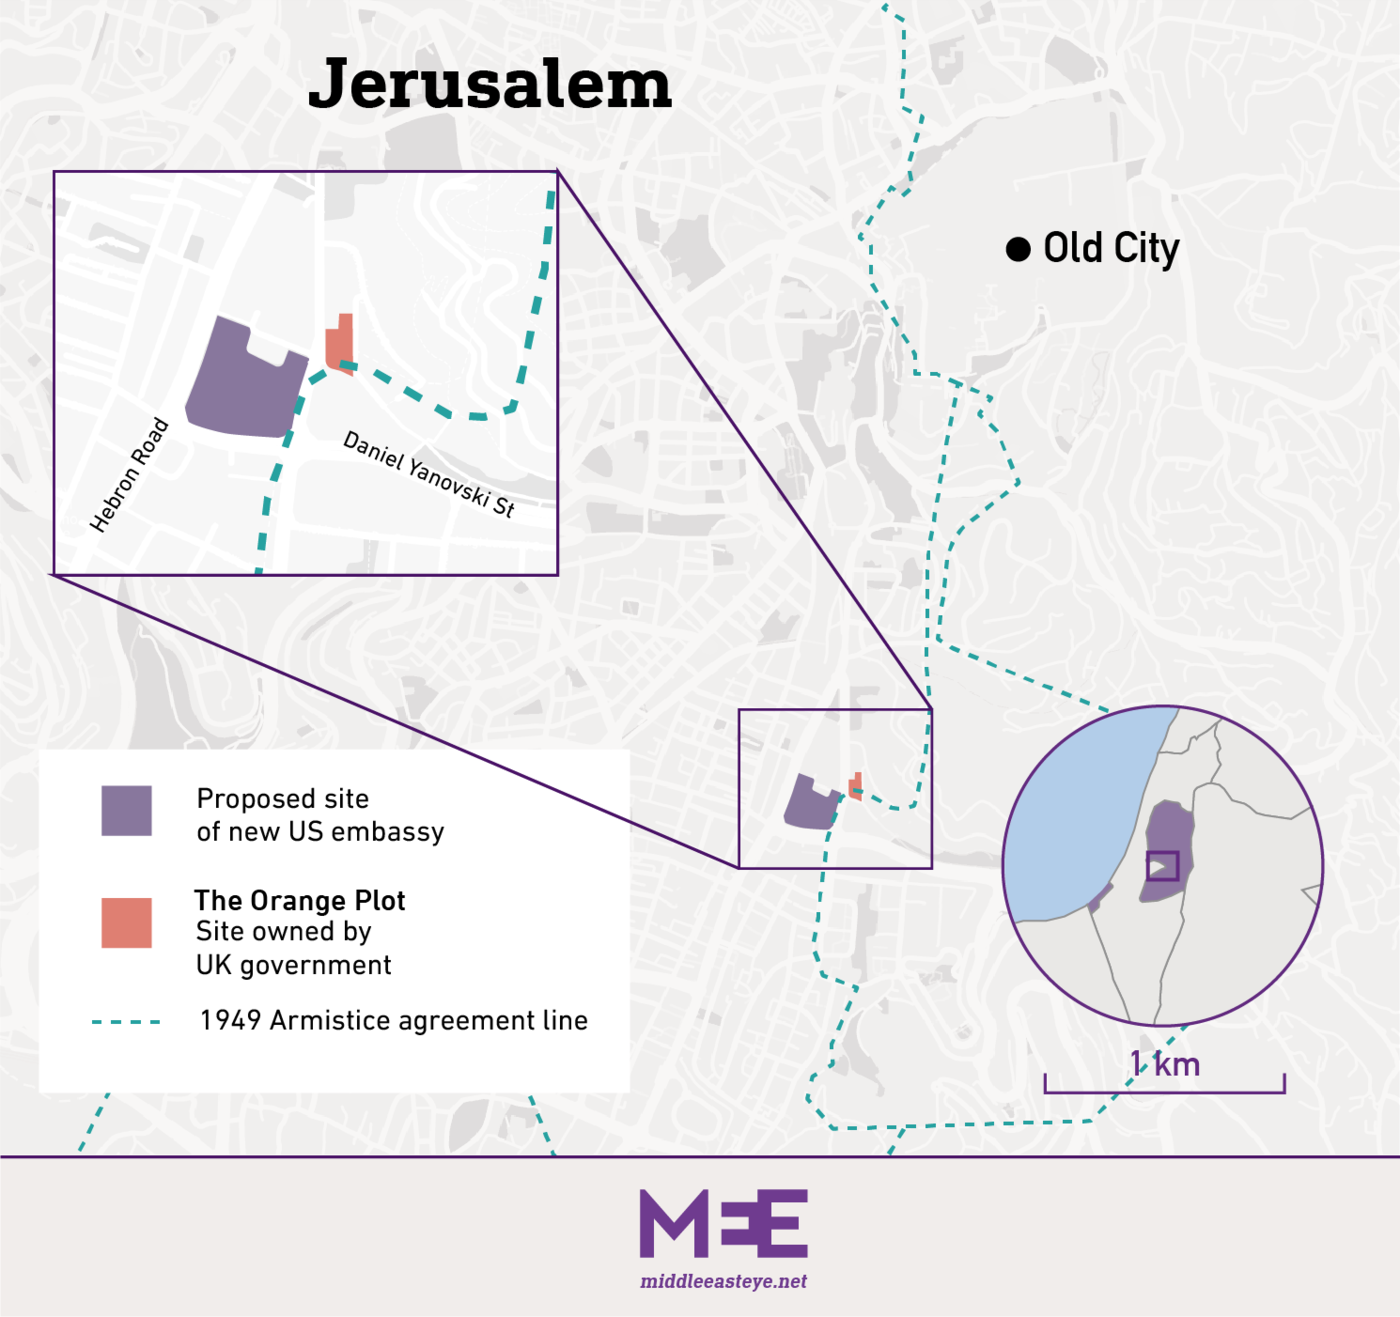 The Orange Plot, land in Jerusalem the UK government earmarked for a potential site of embassy in Israel, alongside the new US embassy